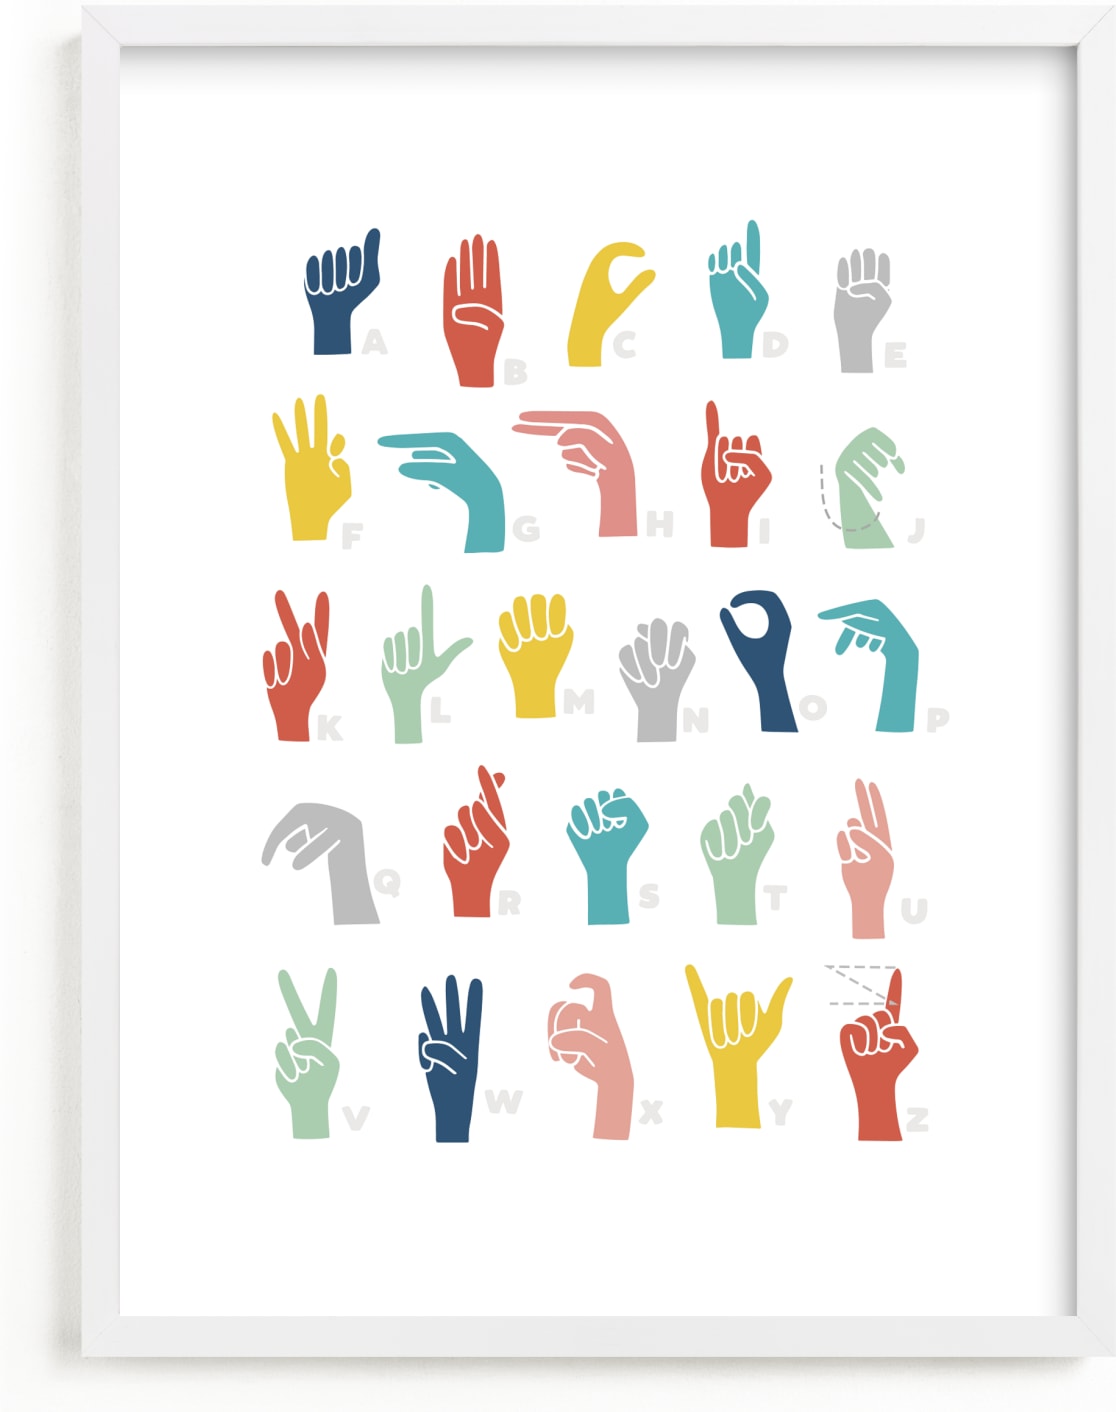 This is a colorful art by Jessie Steury called American Sign Language ABCs.